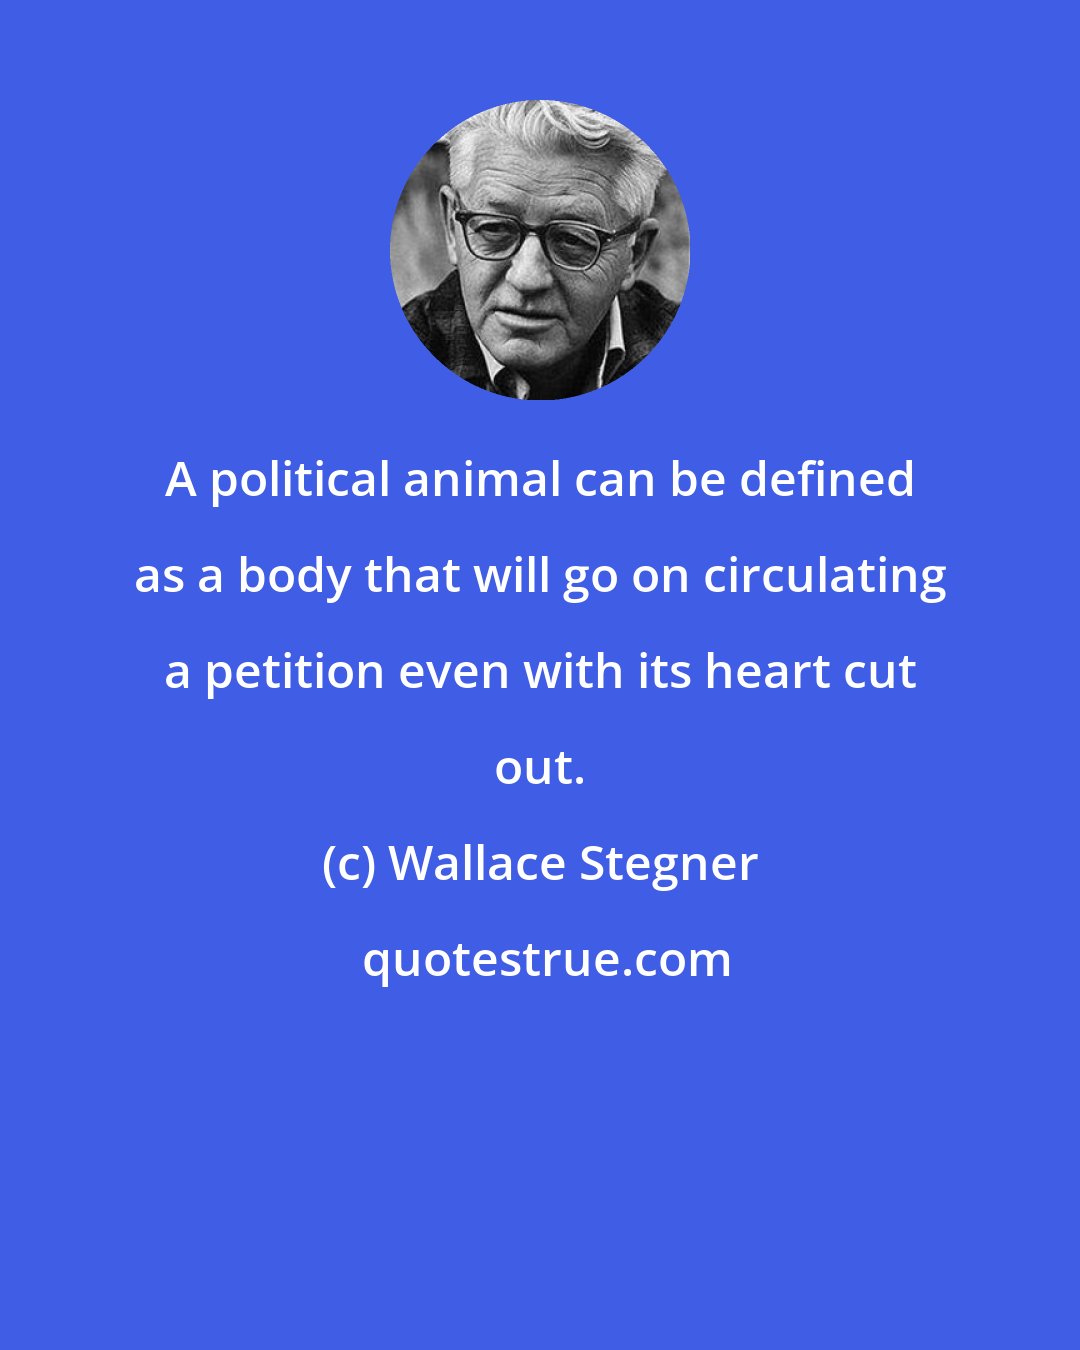 Wallace Stegner: A political animal can be defined as a body that will go on circulating a petition even with its heart cut out.